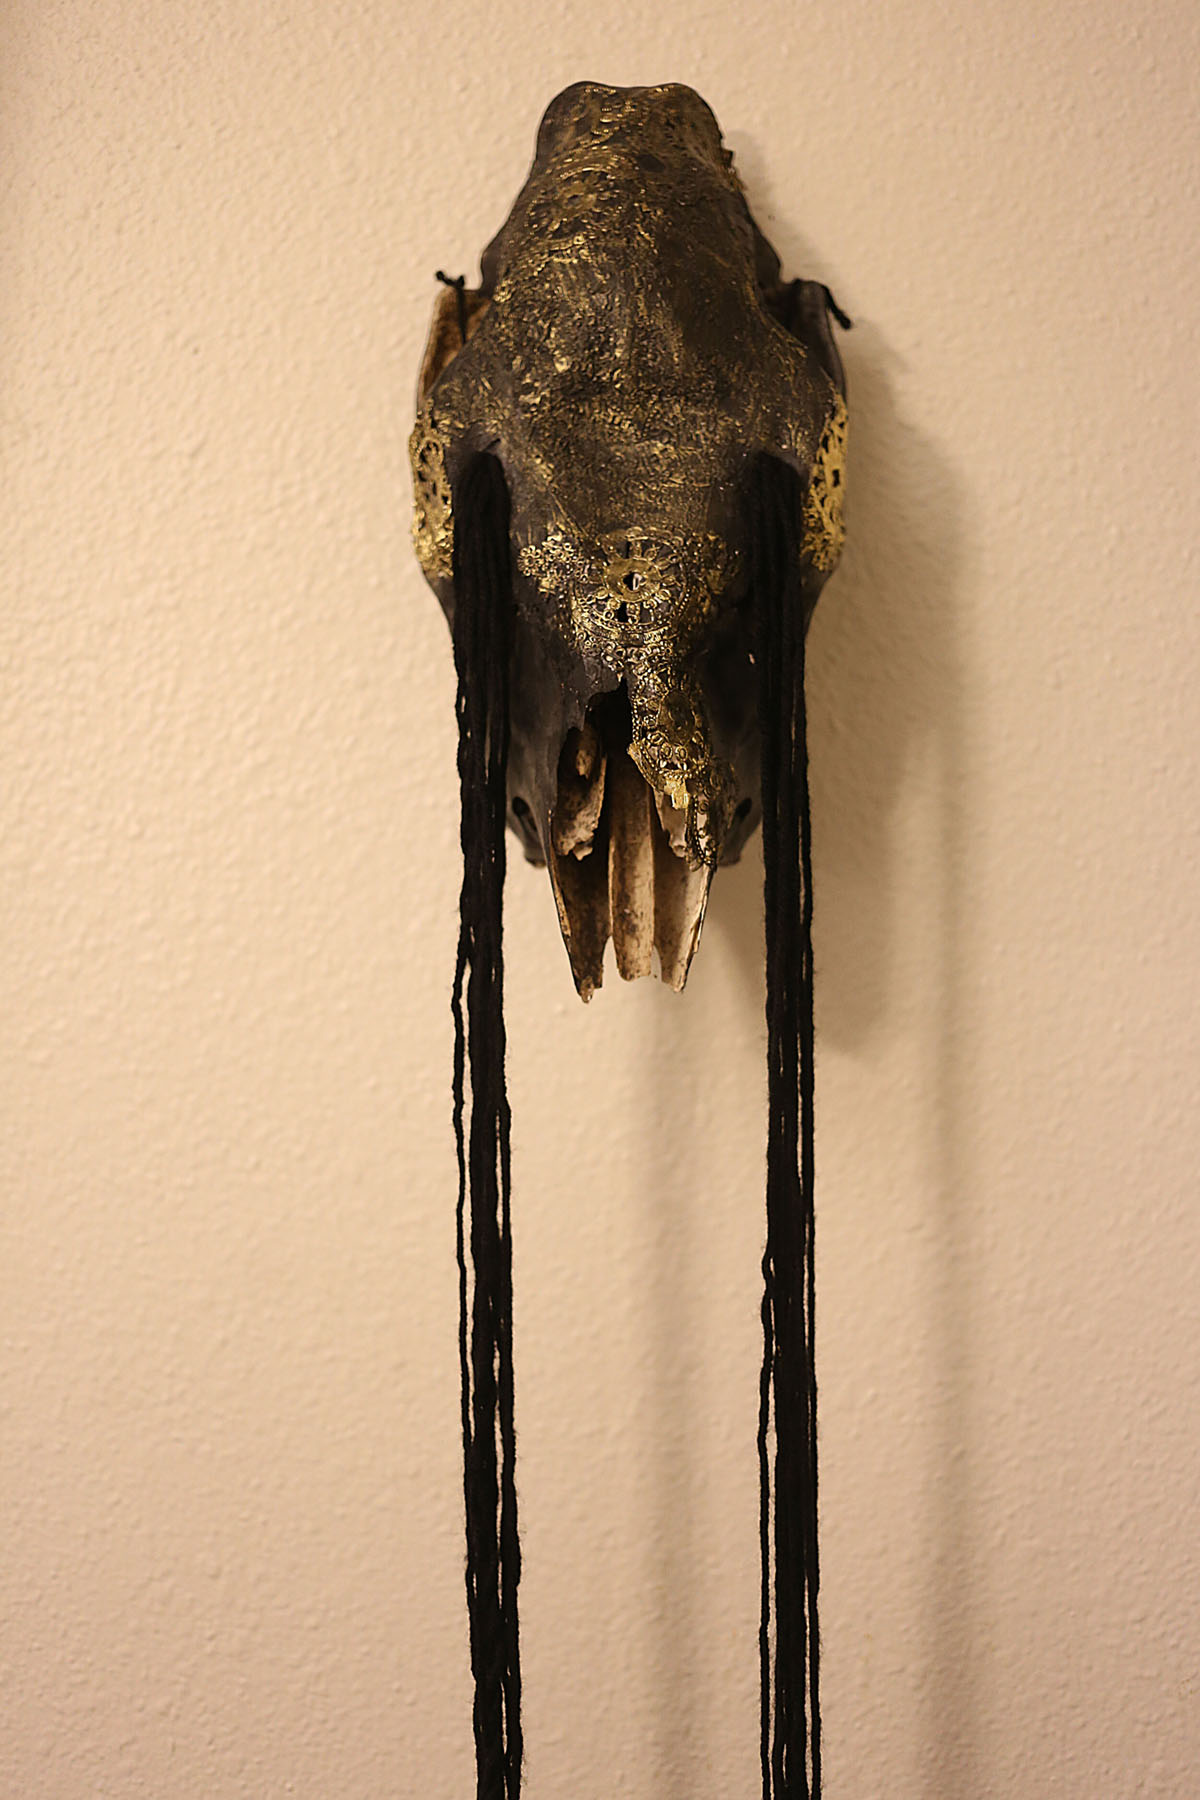 Carved skull with selective gold paint and black thread adornments. Image courtesy of Indi Walter